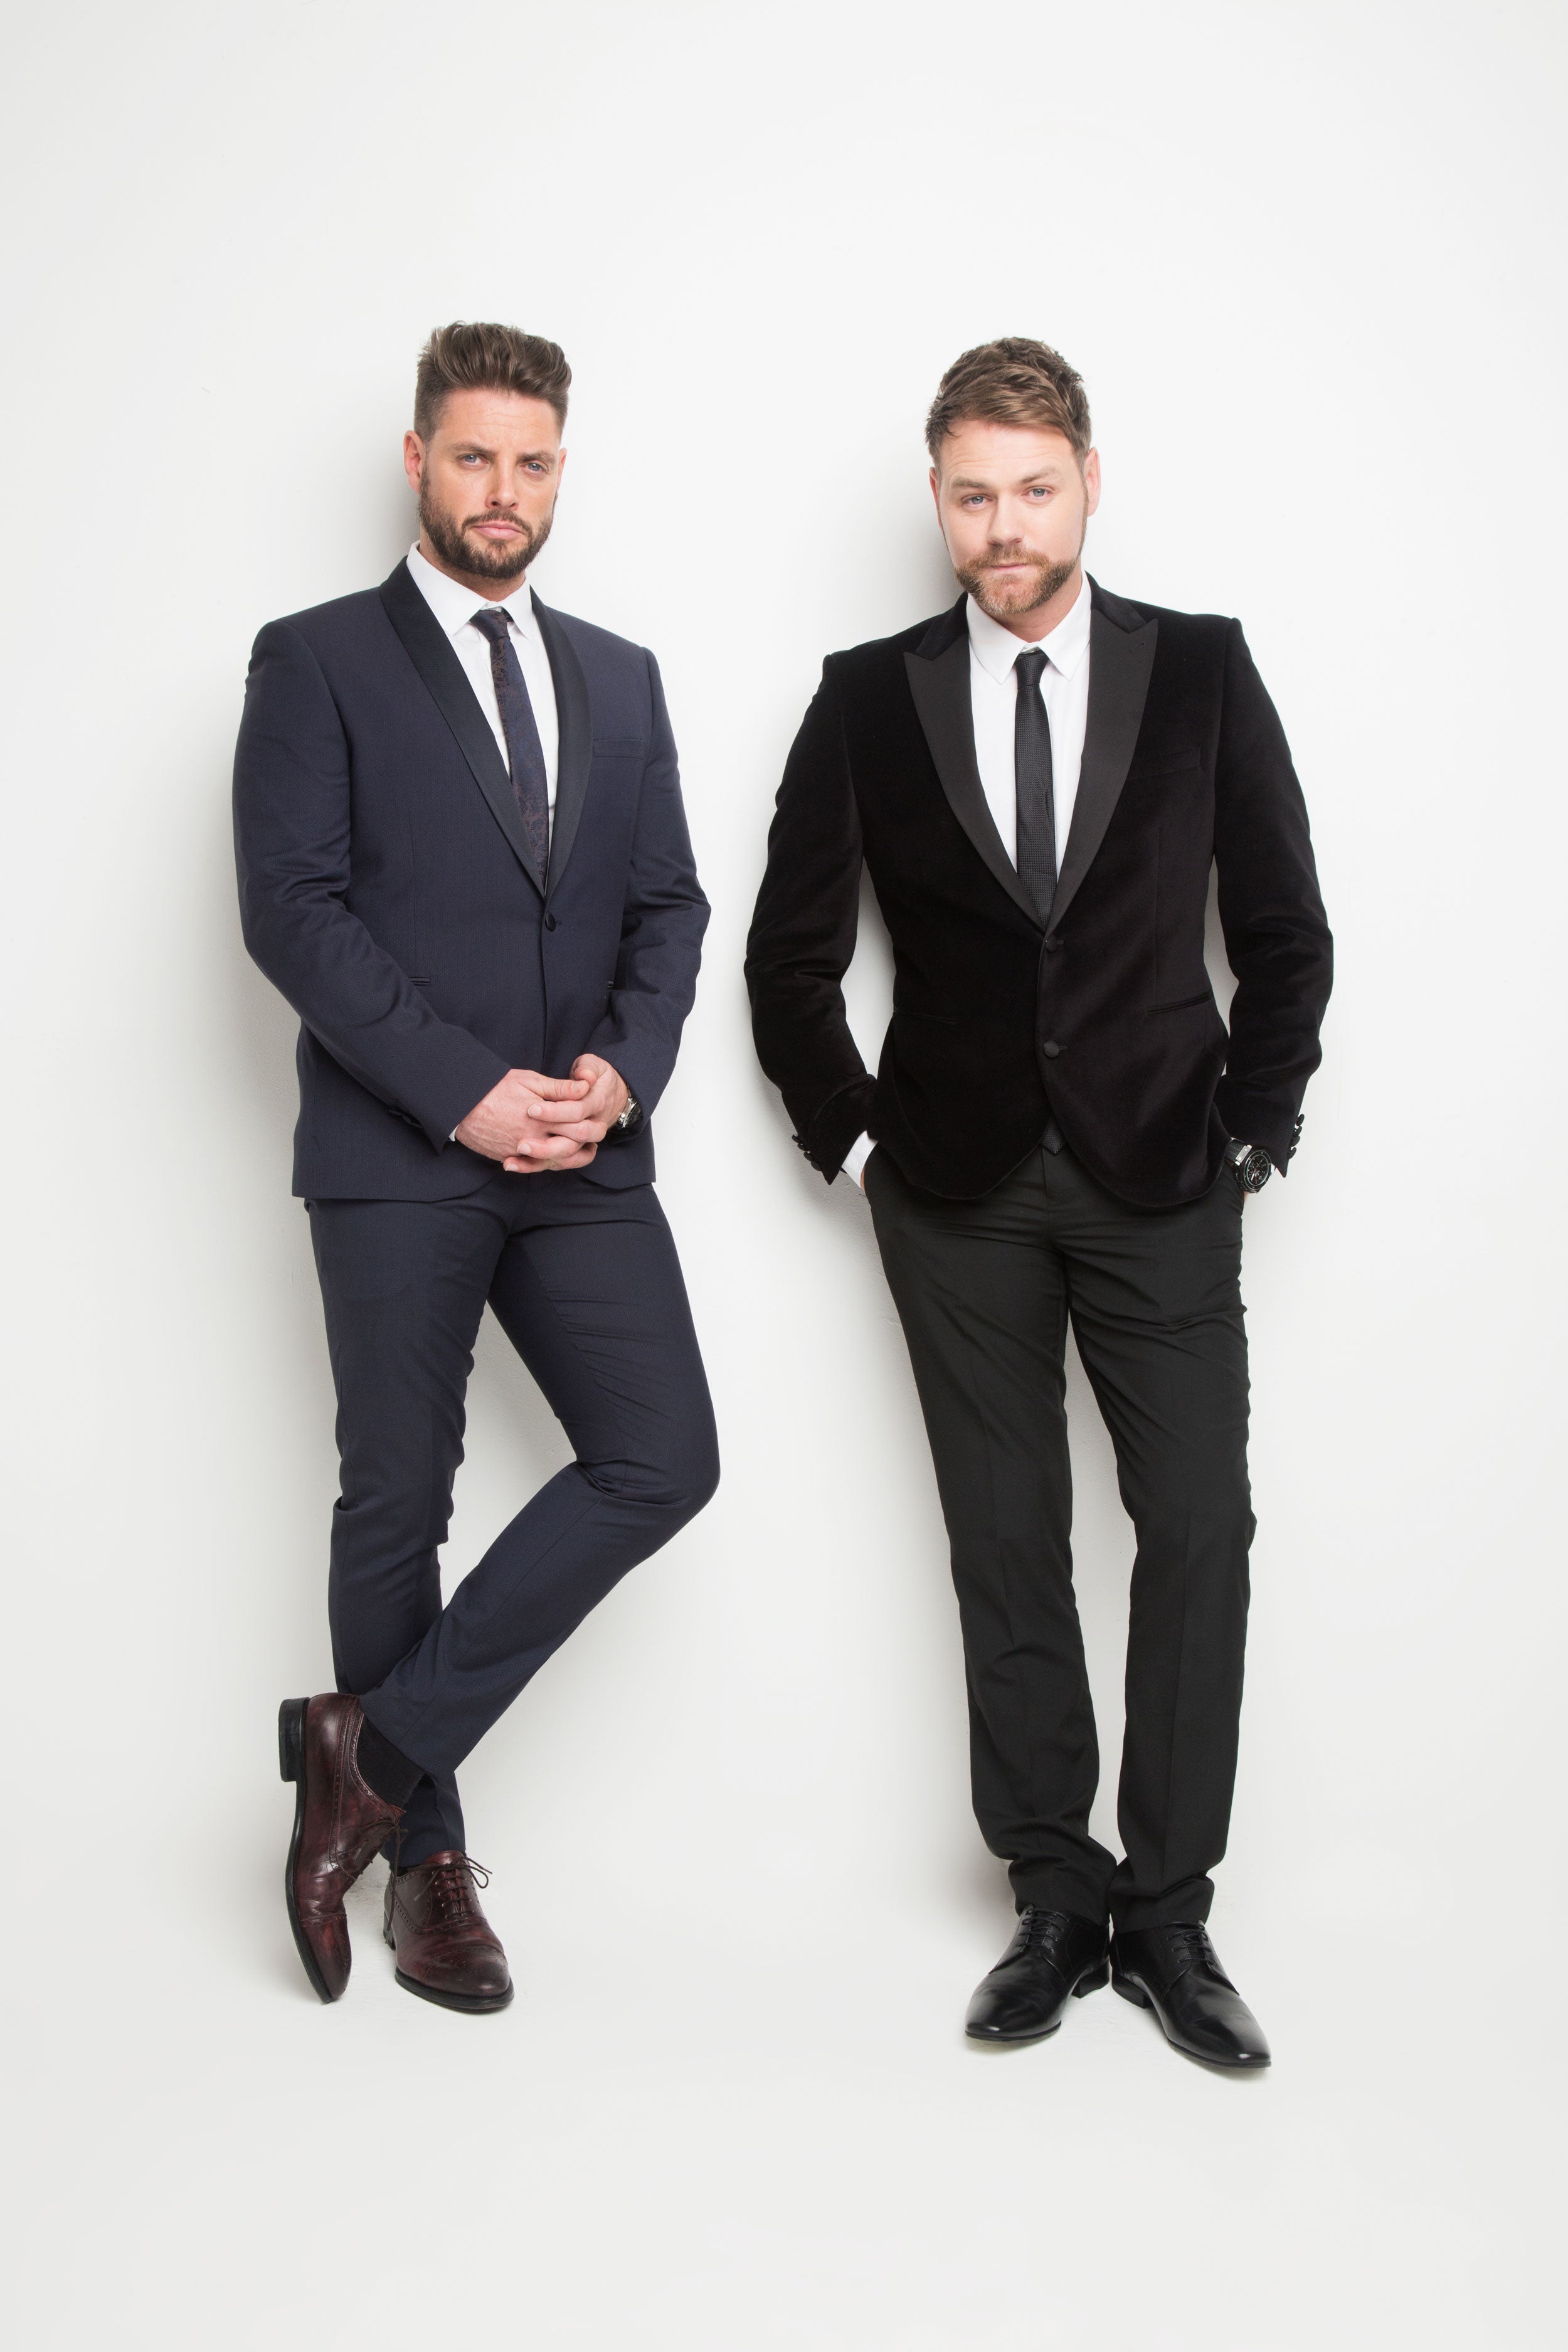 Boyzlife Featuring Keith Duffy & Brian McFadden presale password for advance tickets in Poole